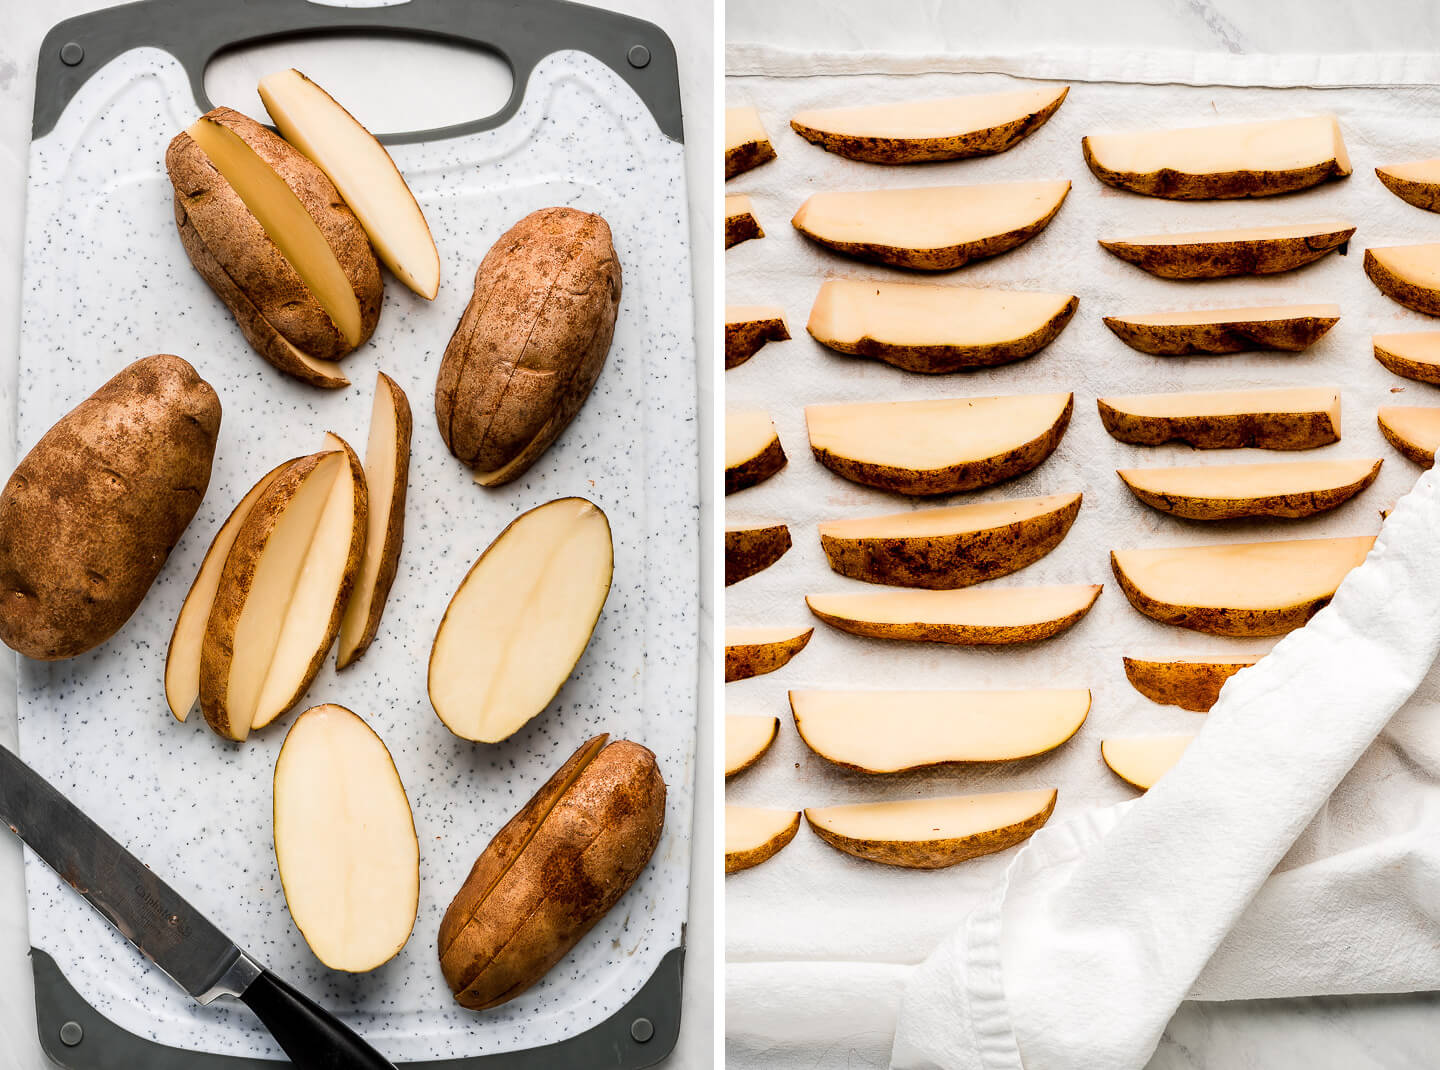 Diptych- Potatoes sliced in wedges on a cutting board; wedges on a towel.